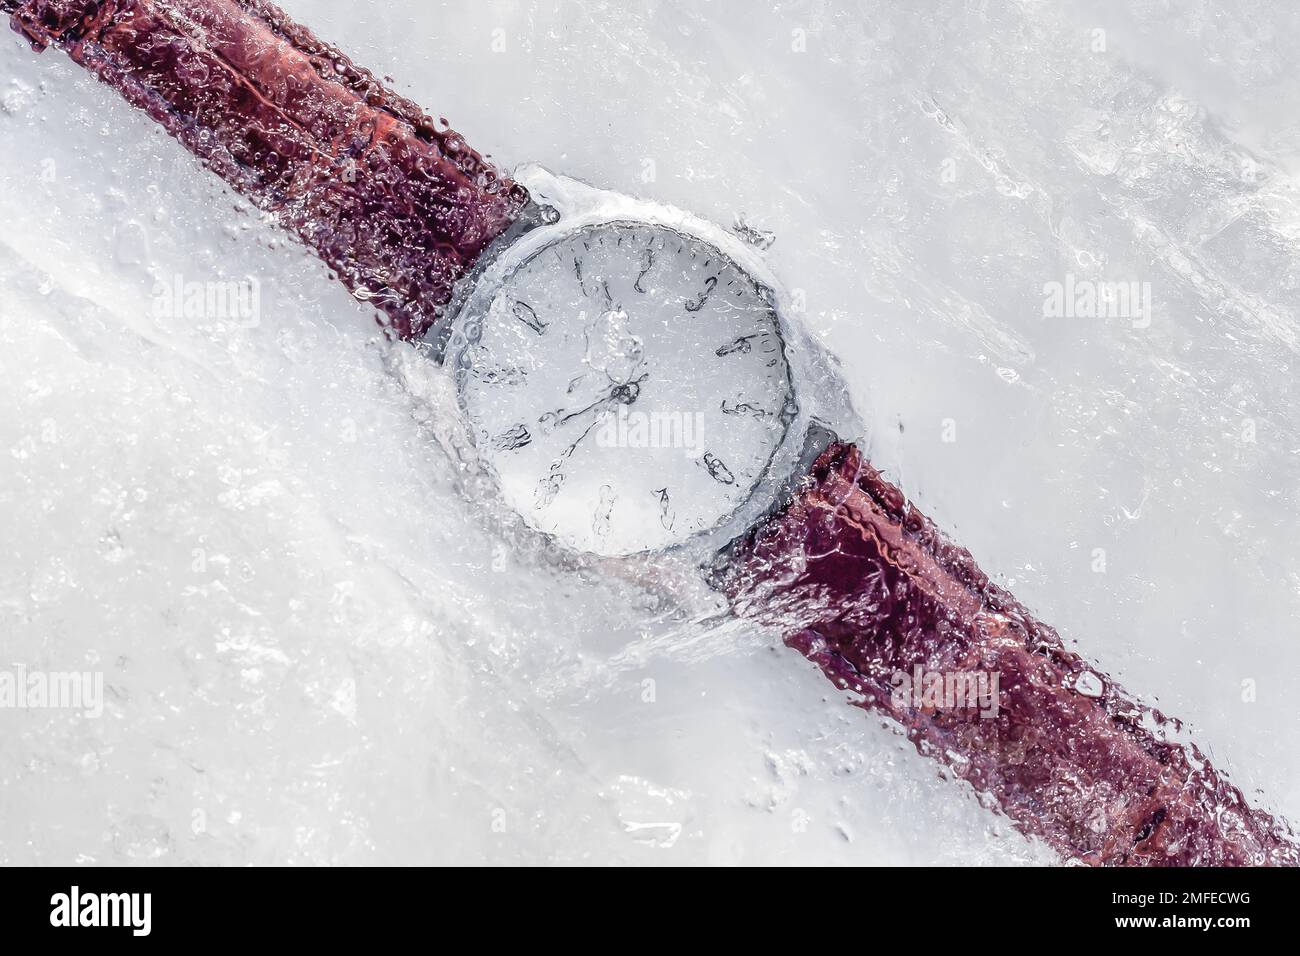 Analogue watch frozen under ice with a brown leather strap. Frozen in time concept Stock Photo